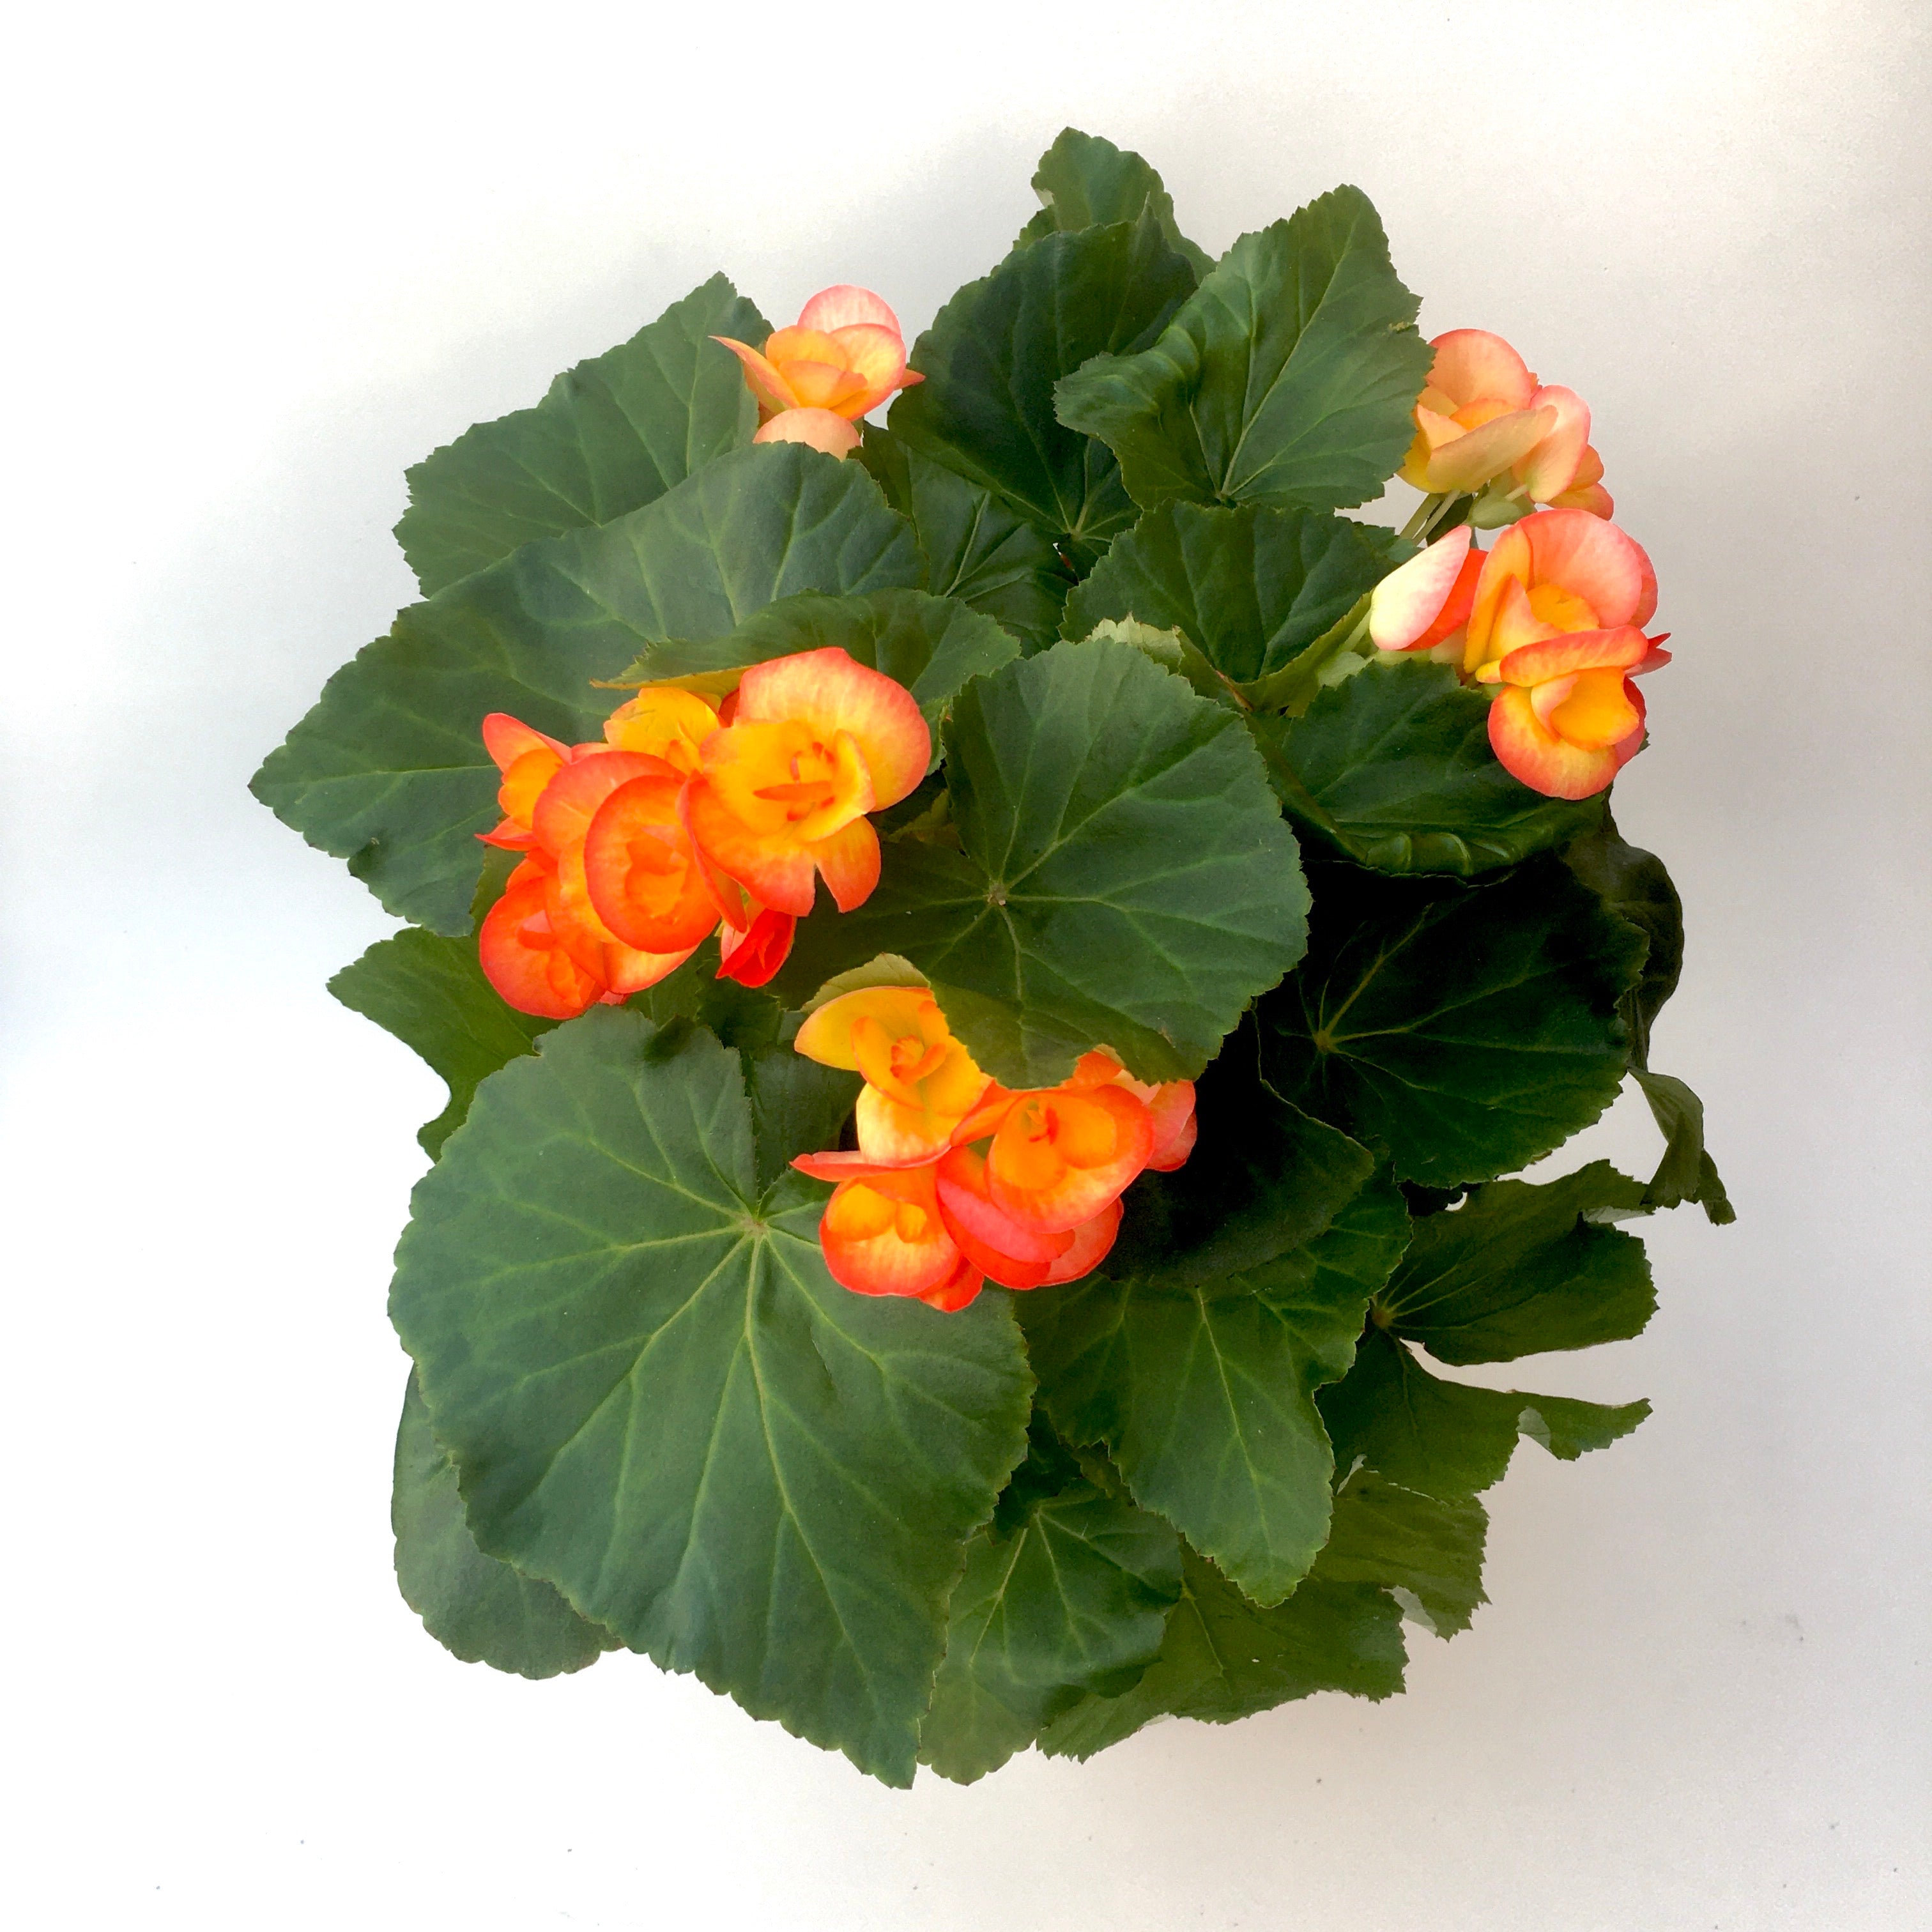 Begonia Rieger 'Apricot'